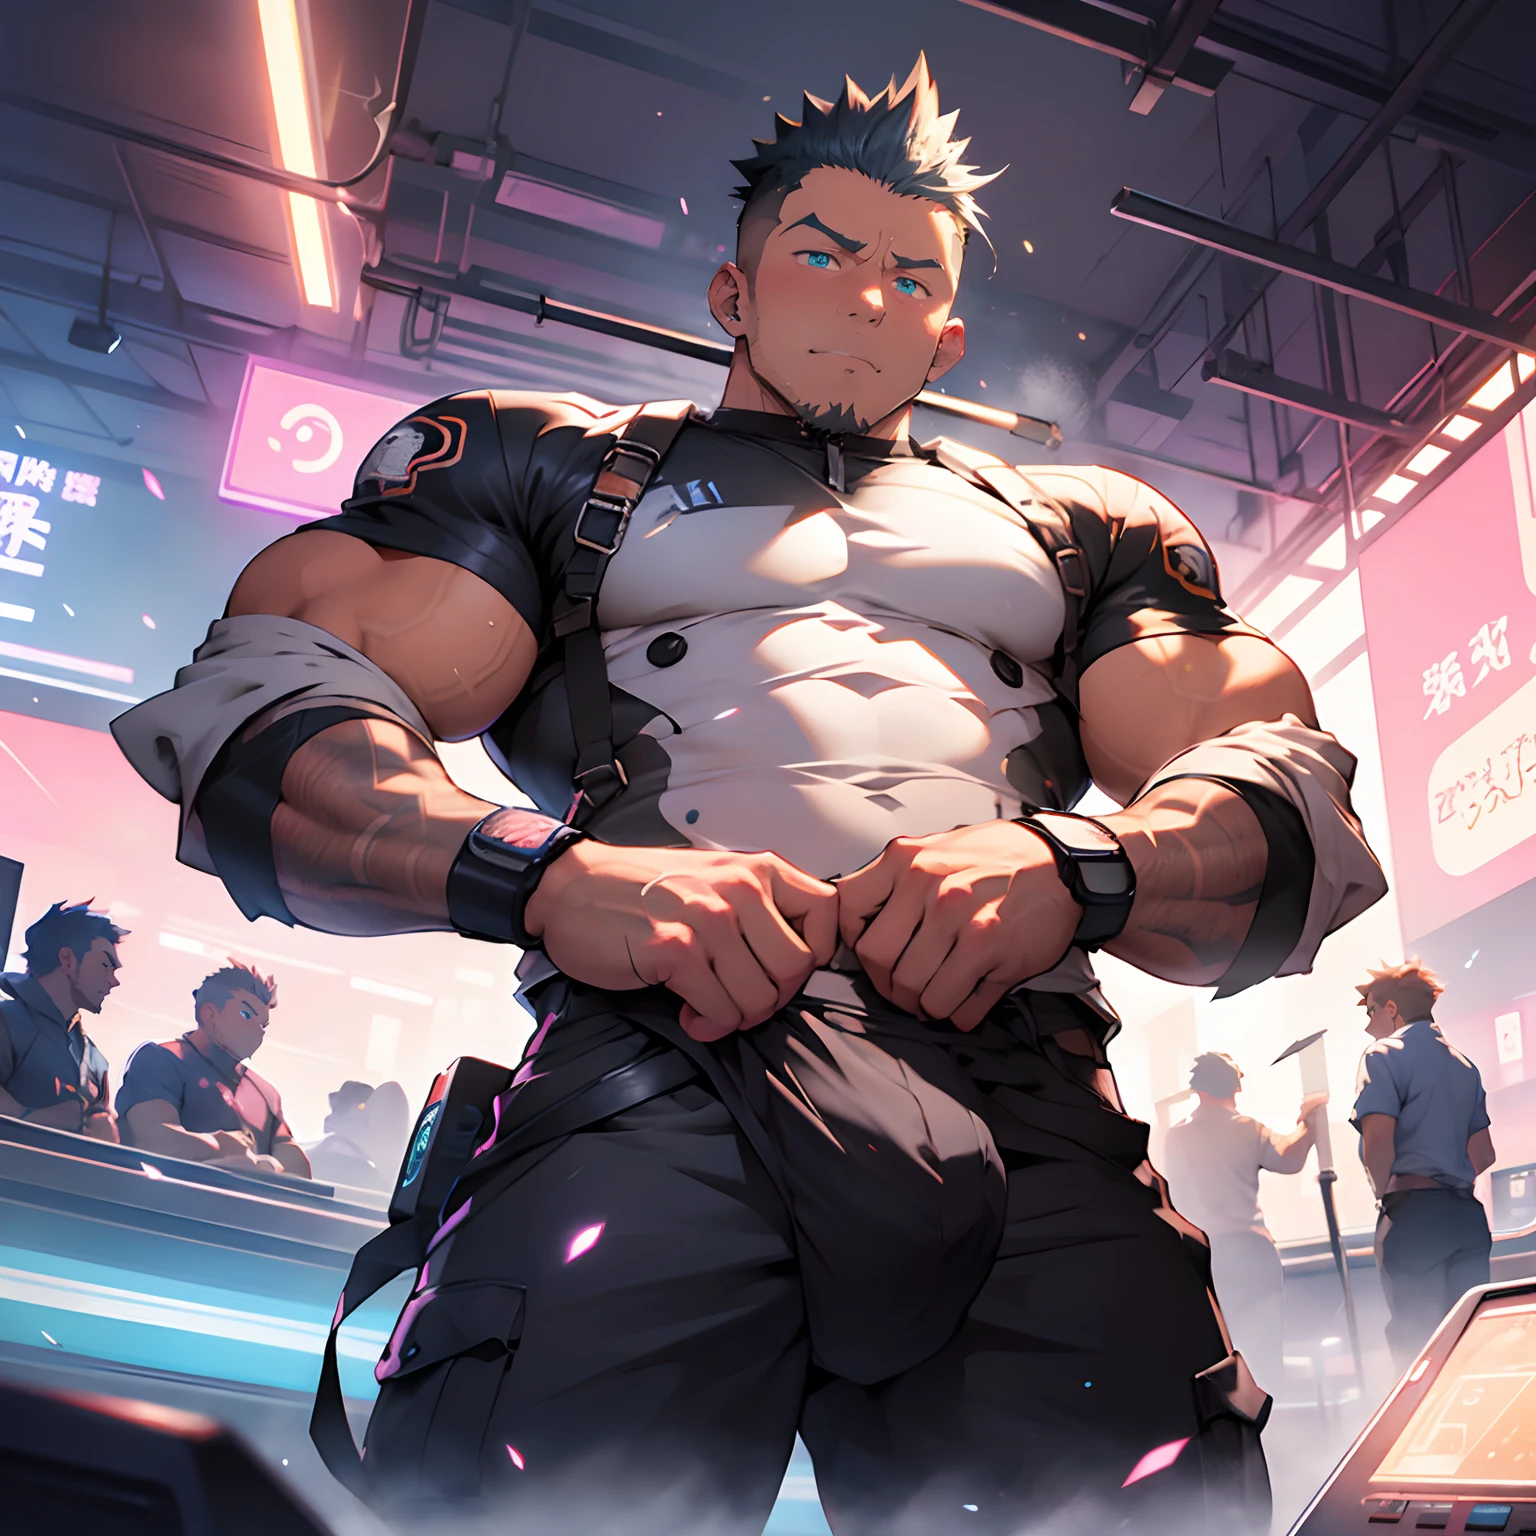 neon lights effects, super high resolution kawaii moe anime 8k, undercut, faux hawk, muscular, elevate the crotch, pitch a rounded huge tent